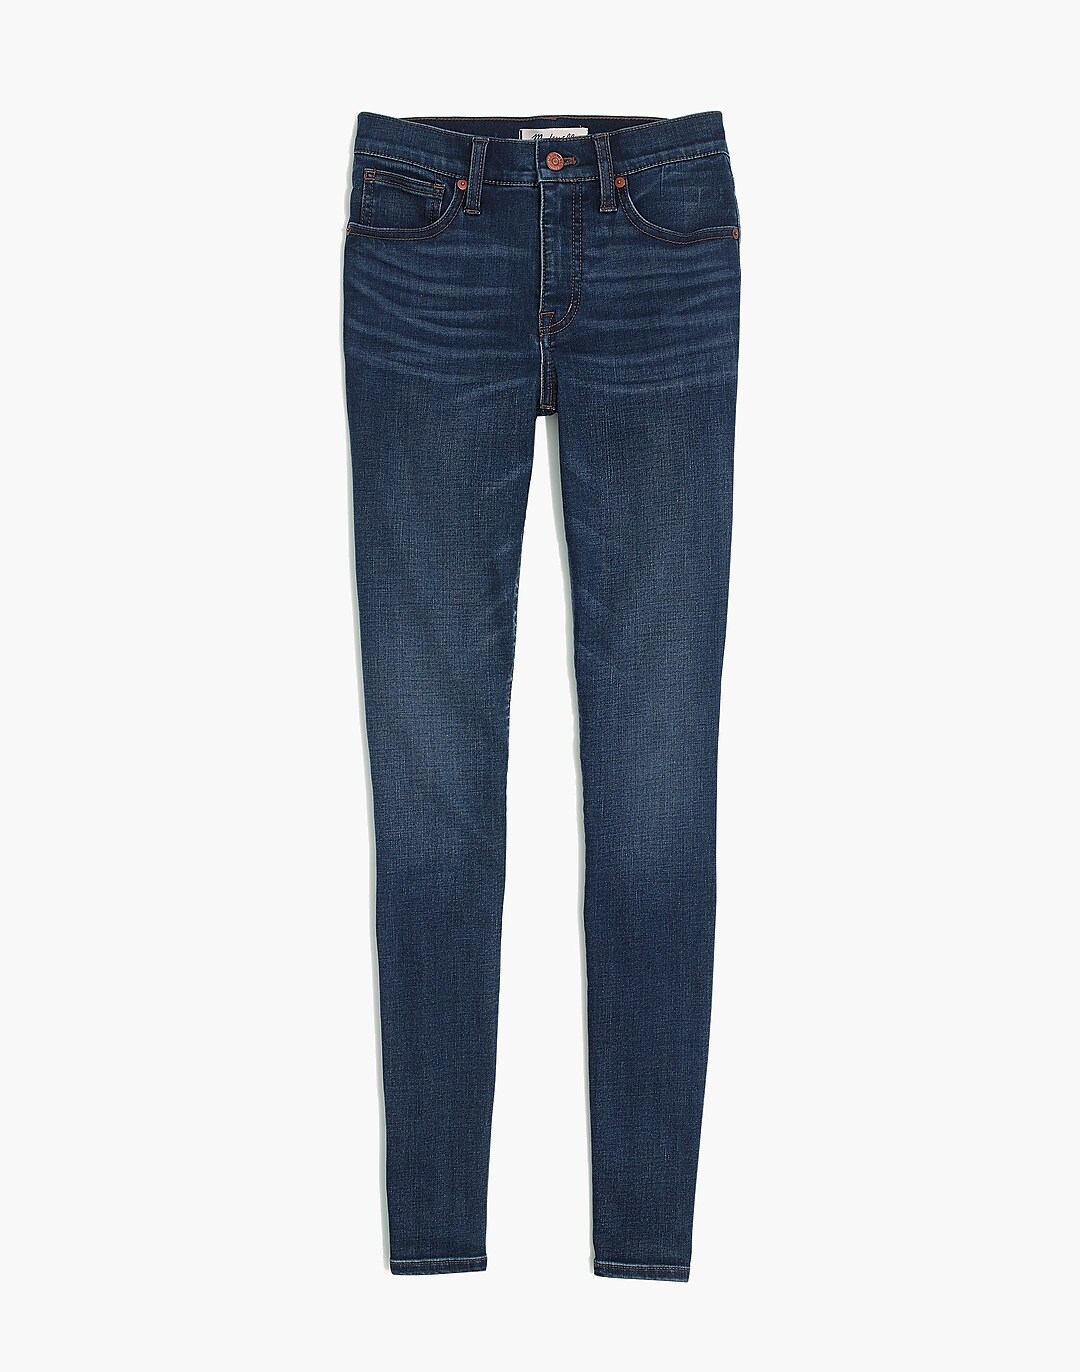 10 High-Rise Skinny Jeans in Tarren Wash: THERMOLITE® Edition